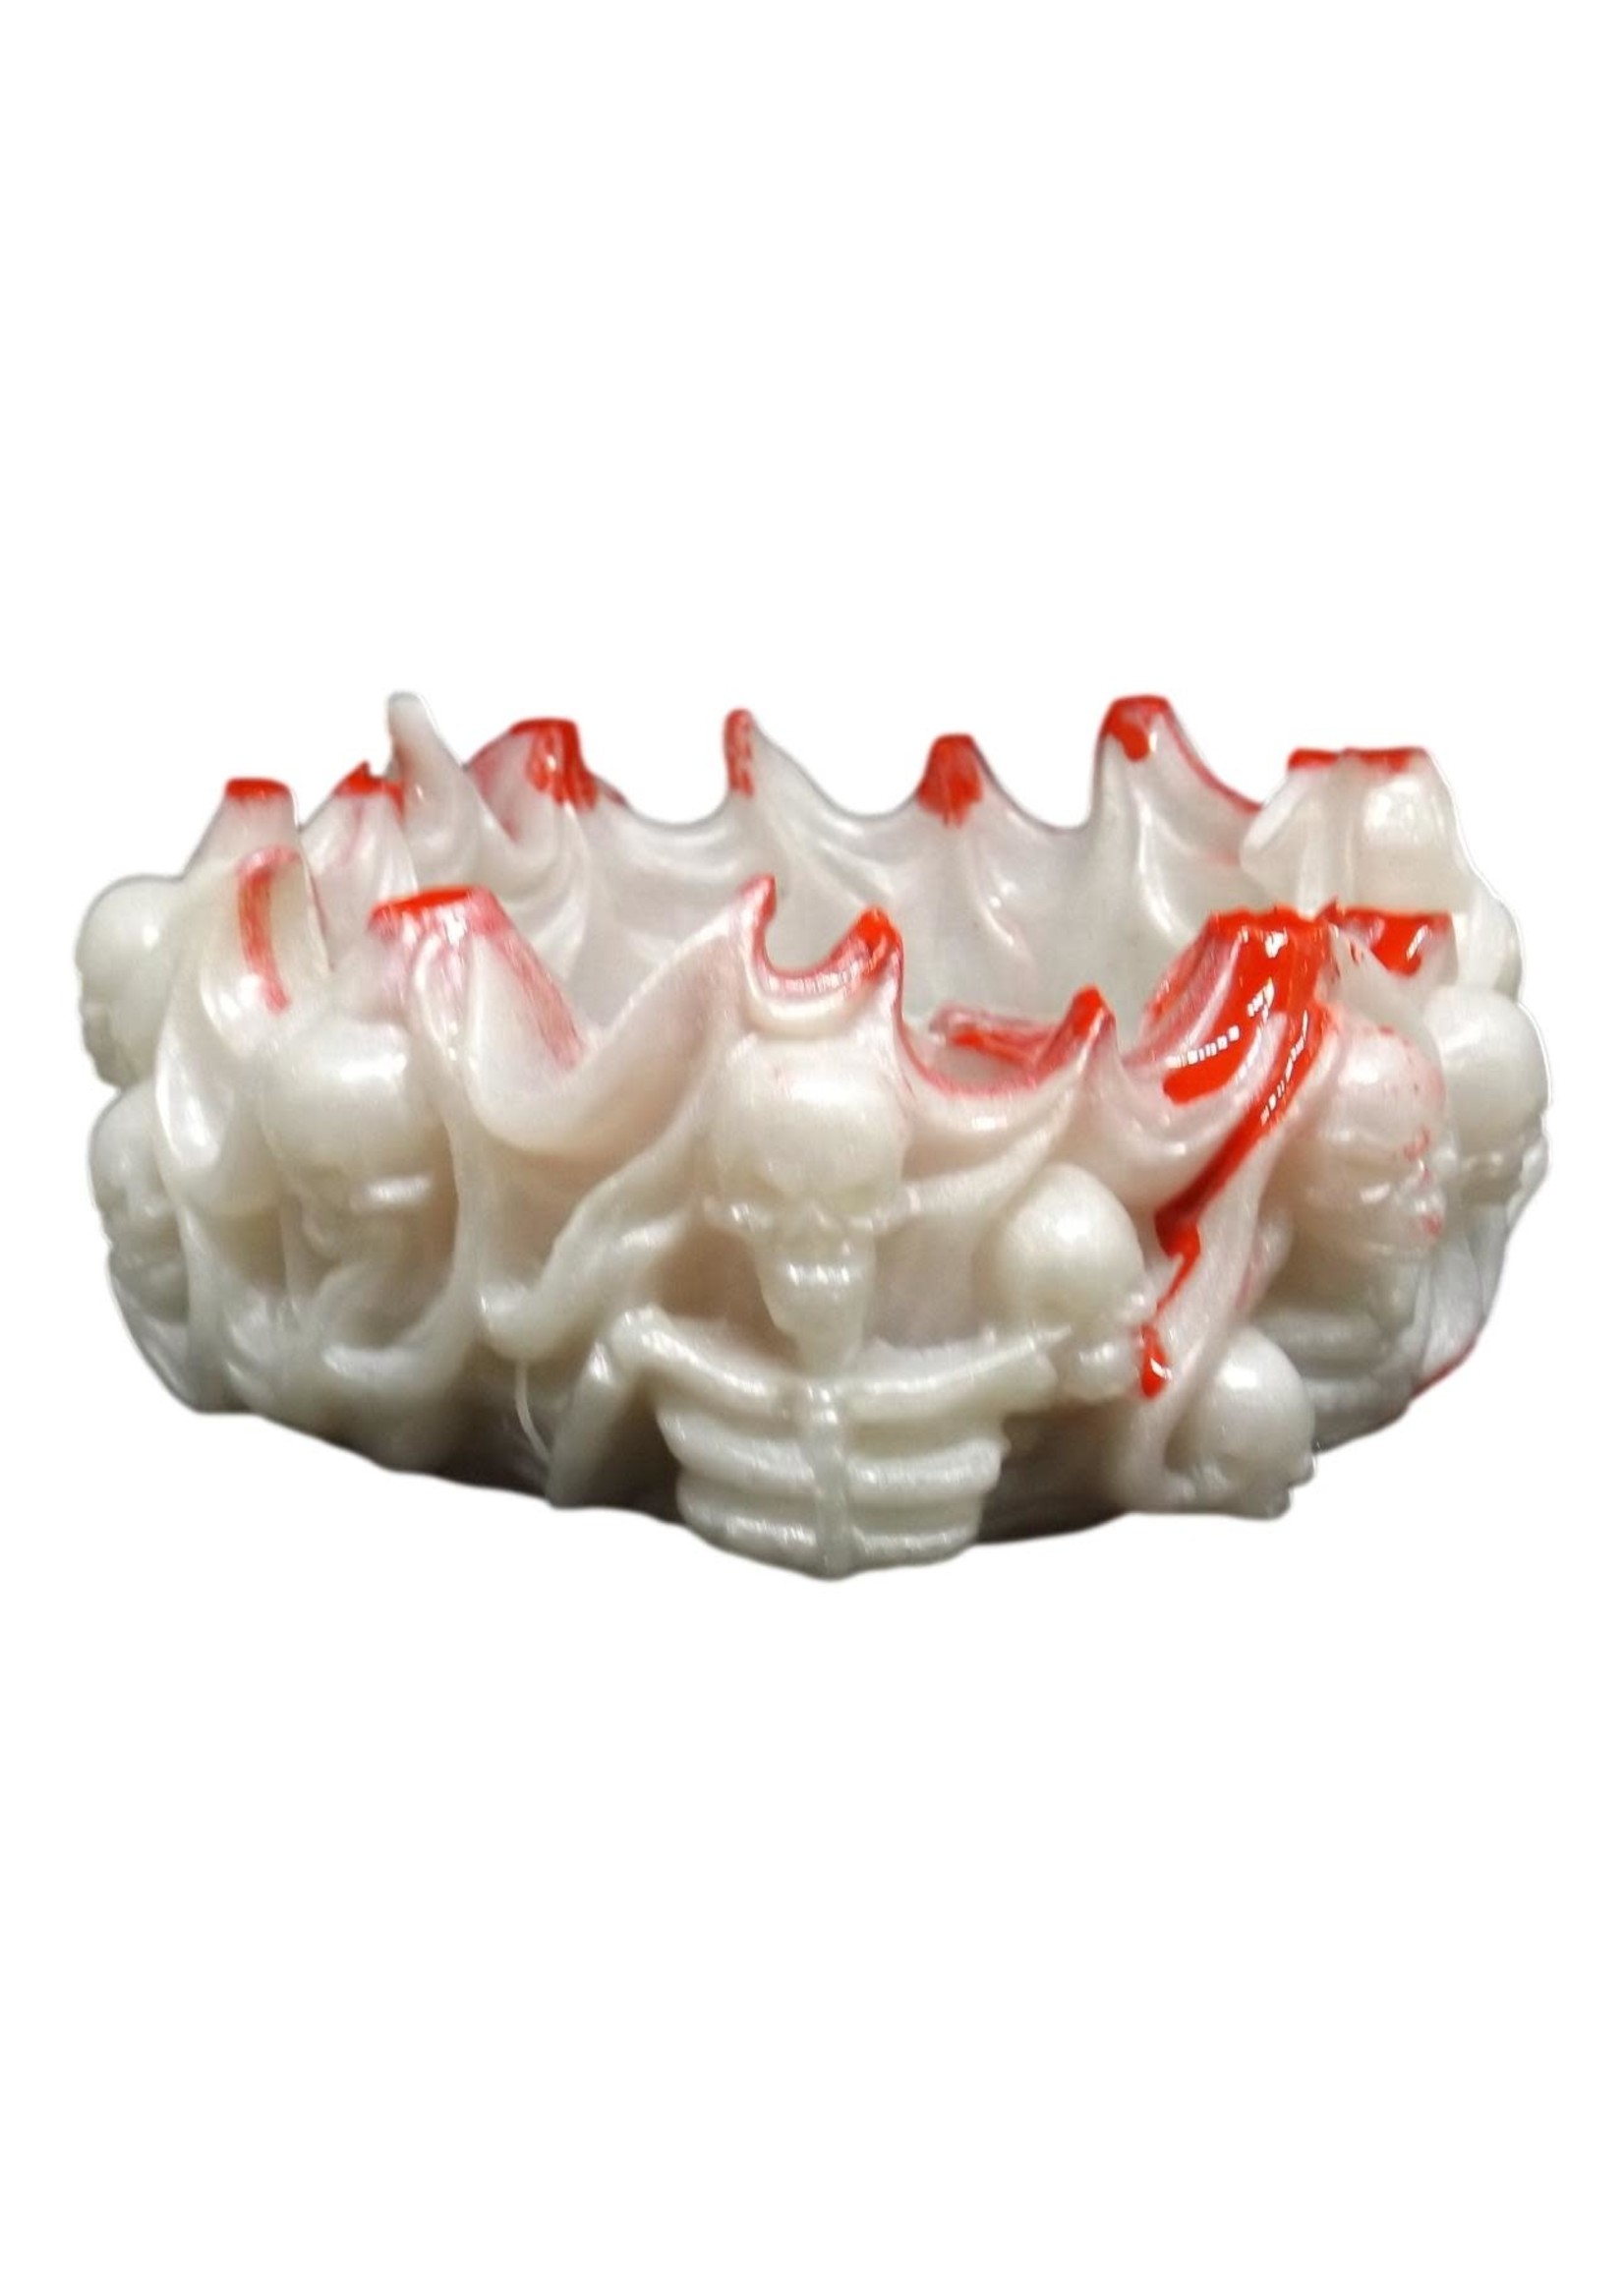 East Coast Sirens Skull Resin Ashtray - White with Blood